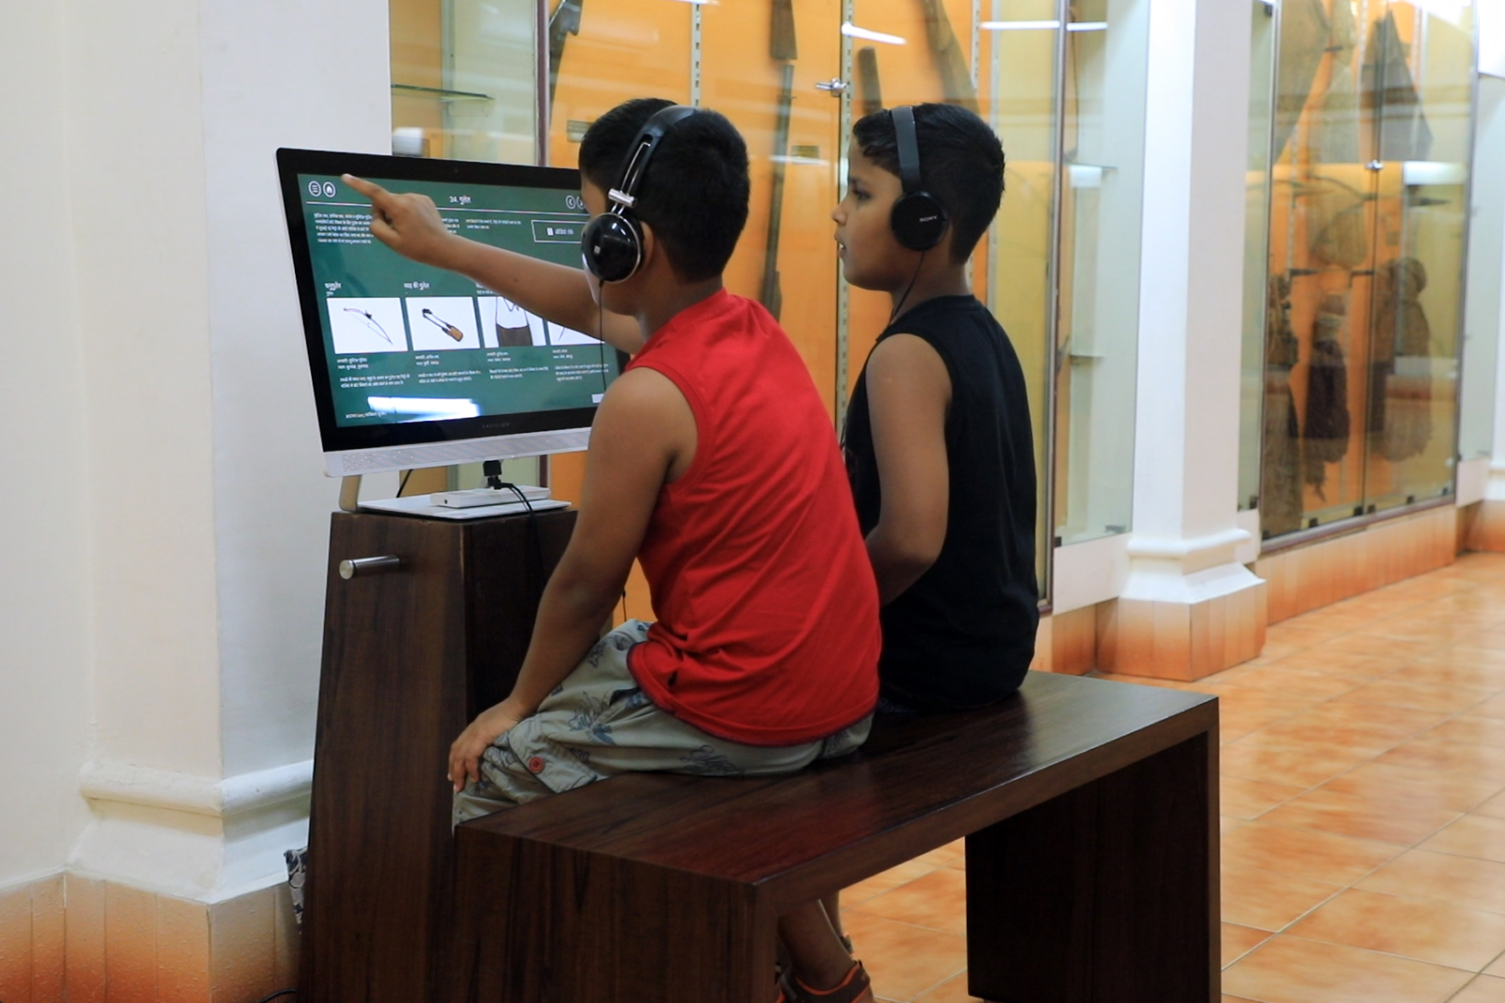 Two boys interacting with touch screen kiosk